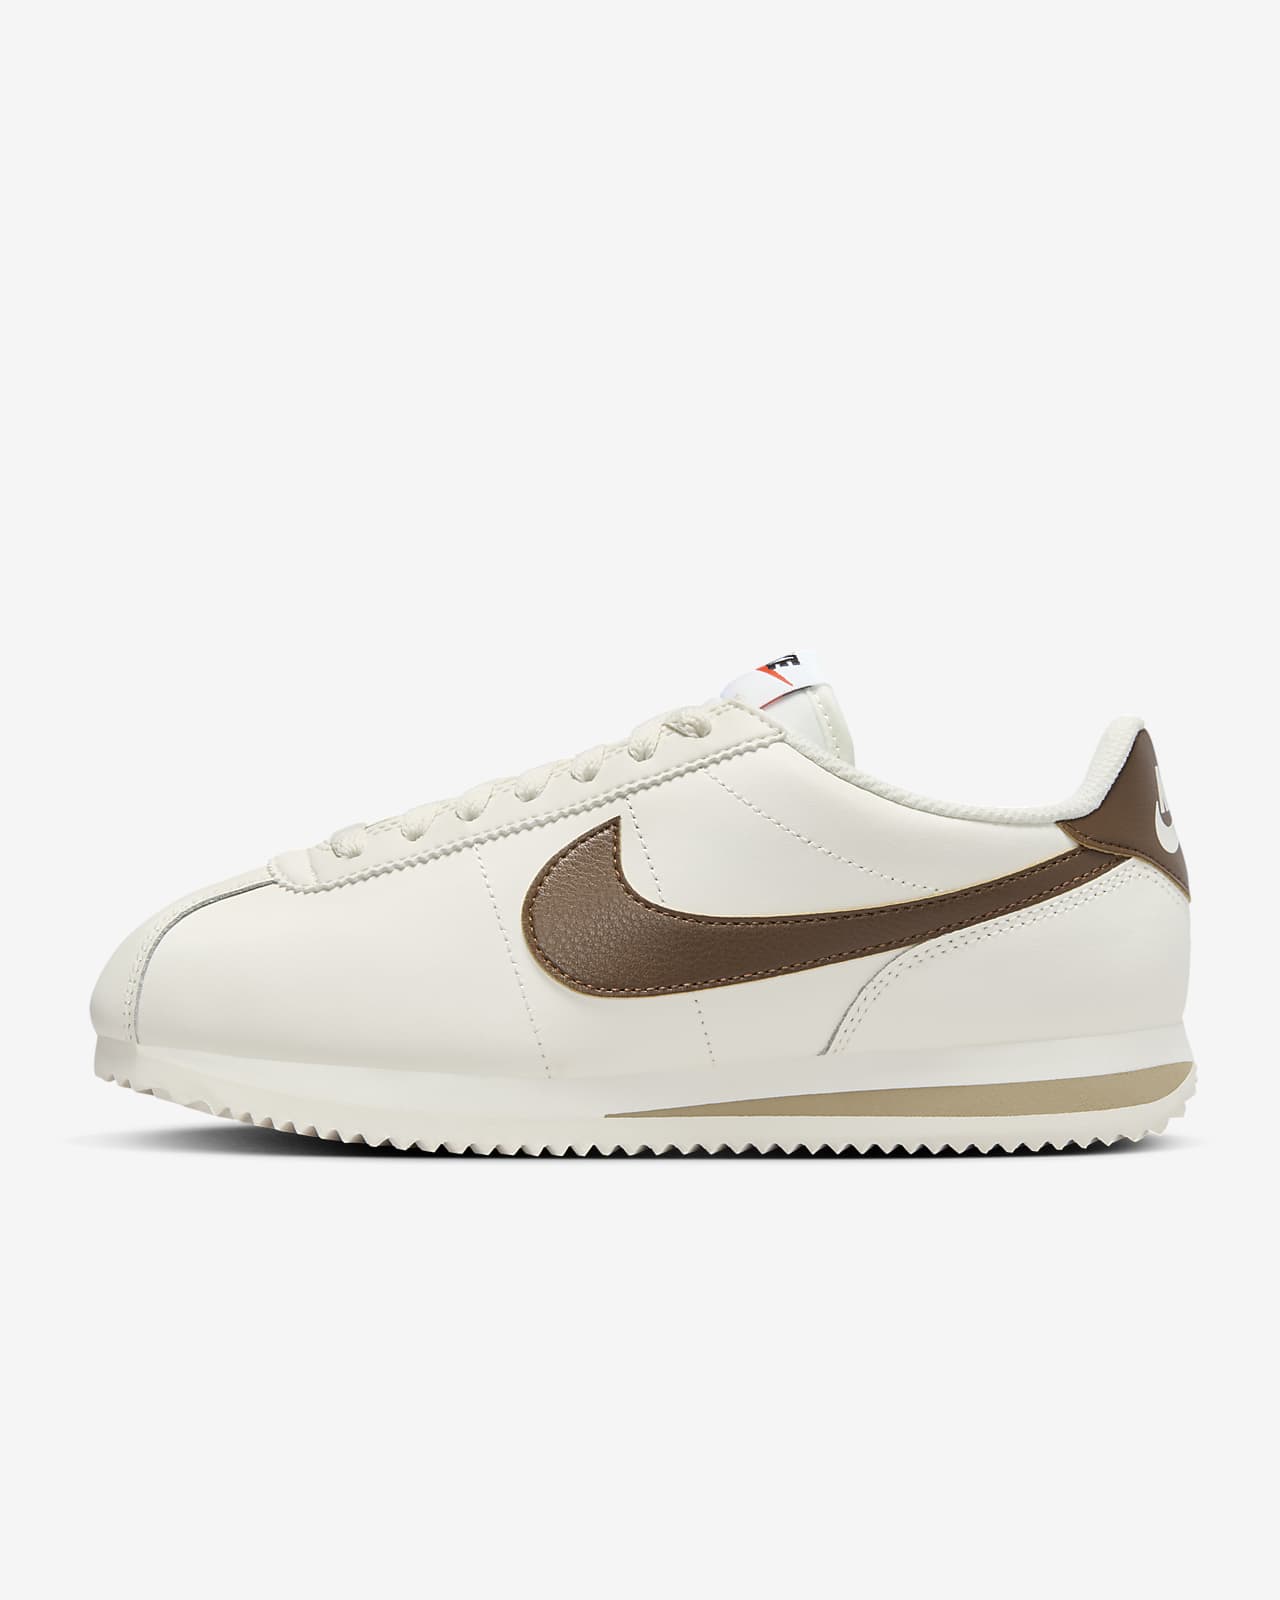 Chaussure Nike Cortez Leather